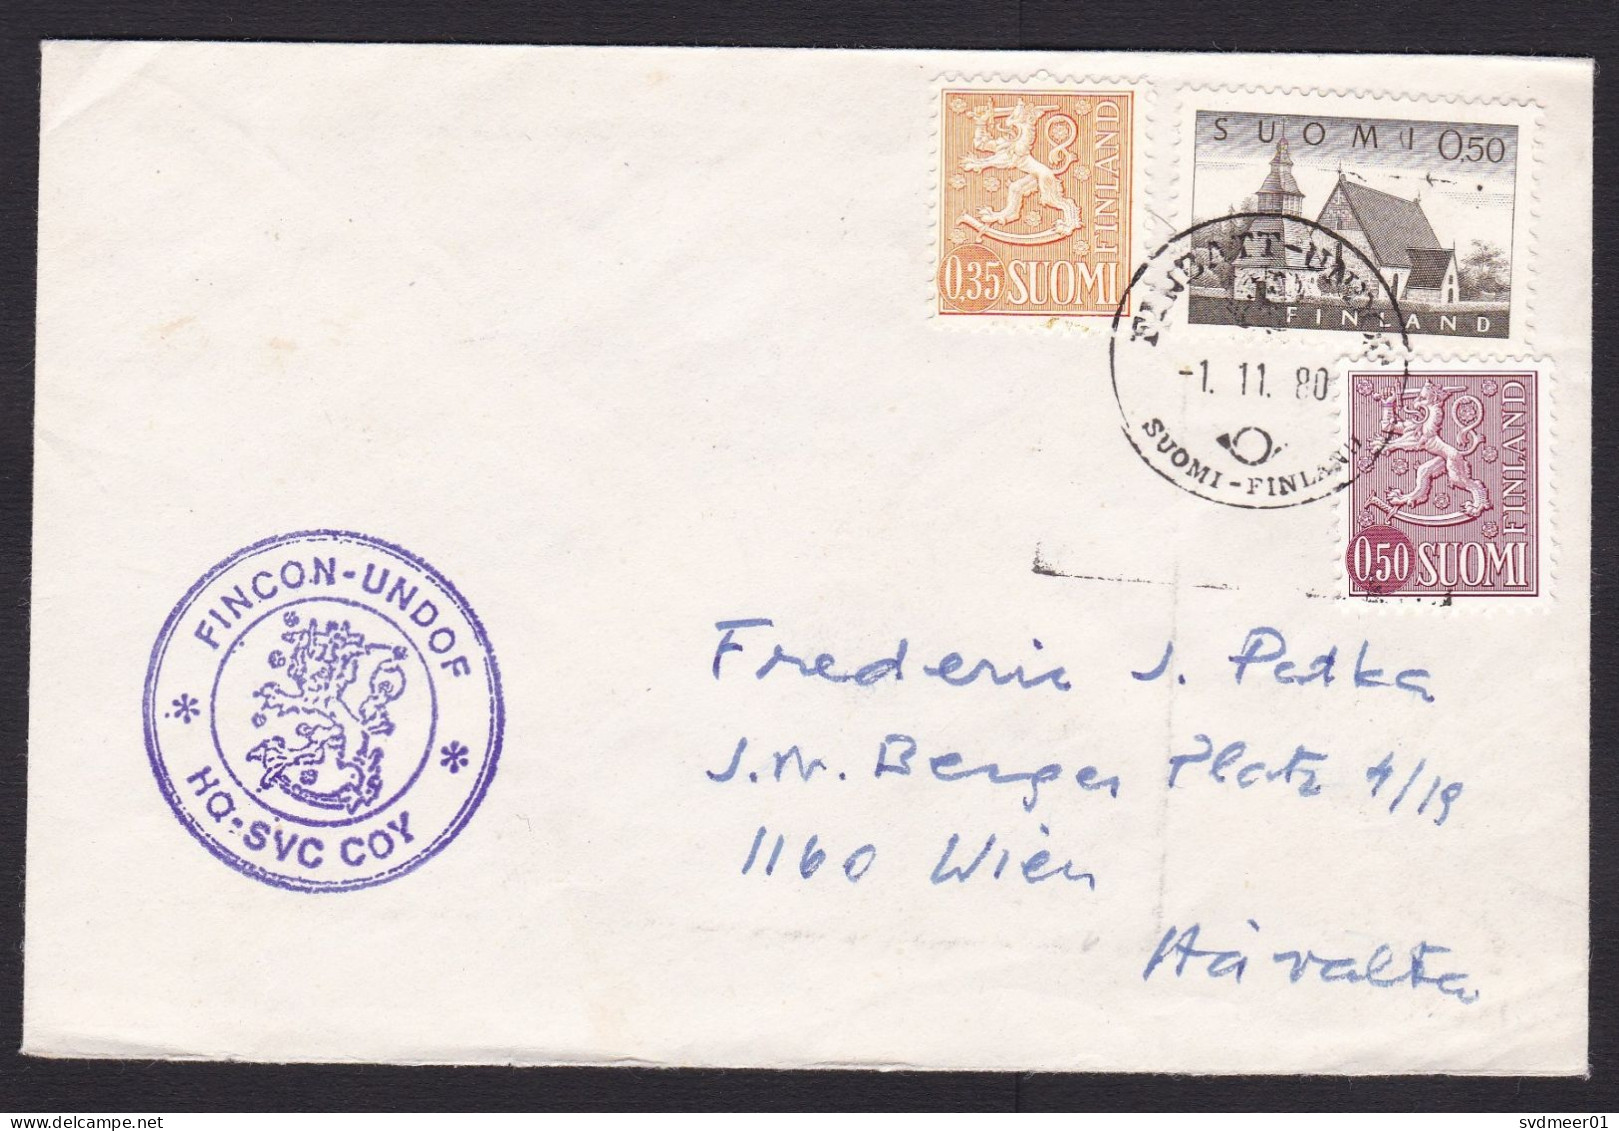 Finland: Cover To Austria, 1980, 3 Stamps, Military Cancel UNDOF, UN Forces Golan, Syria-Israel, Rare (traces Of Use) - Lettres & Documents